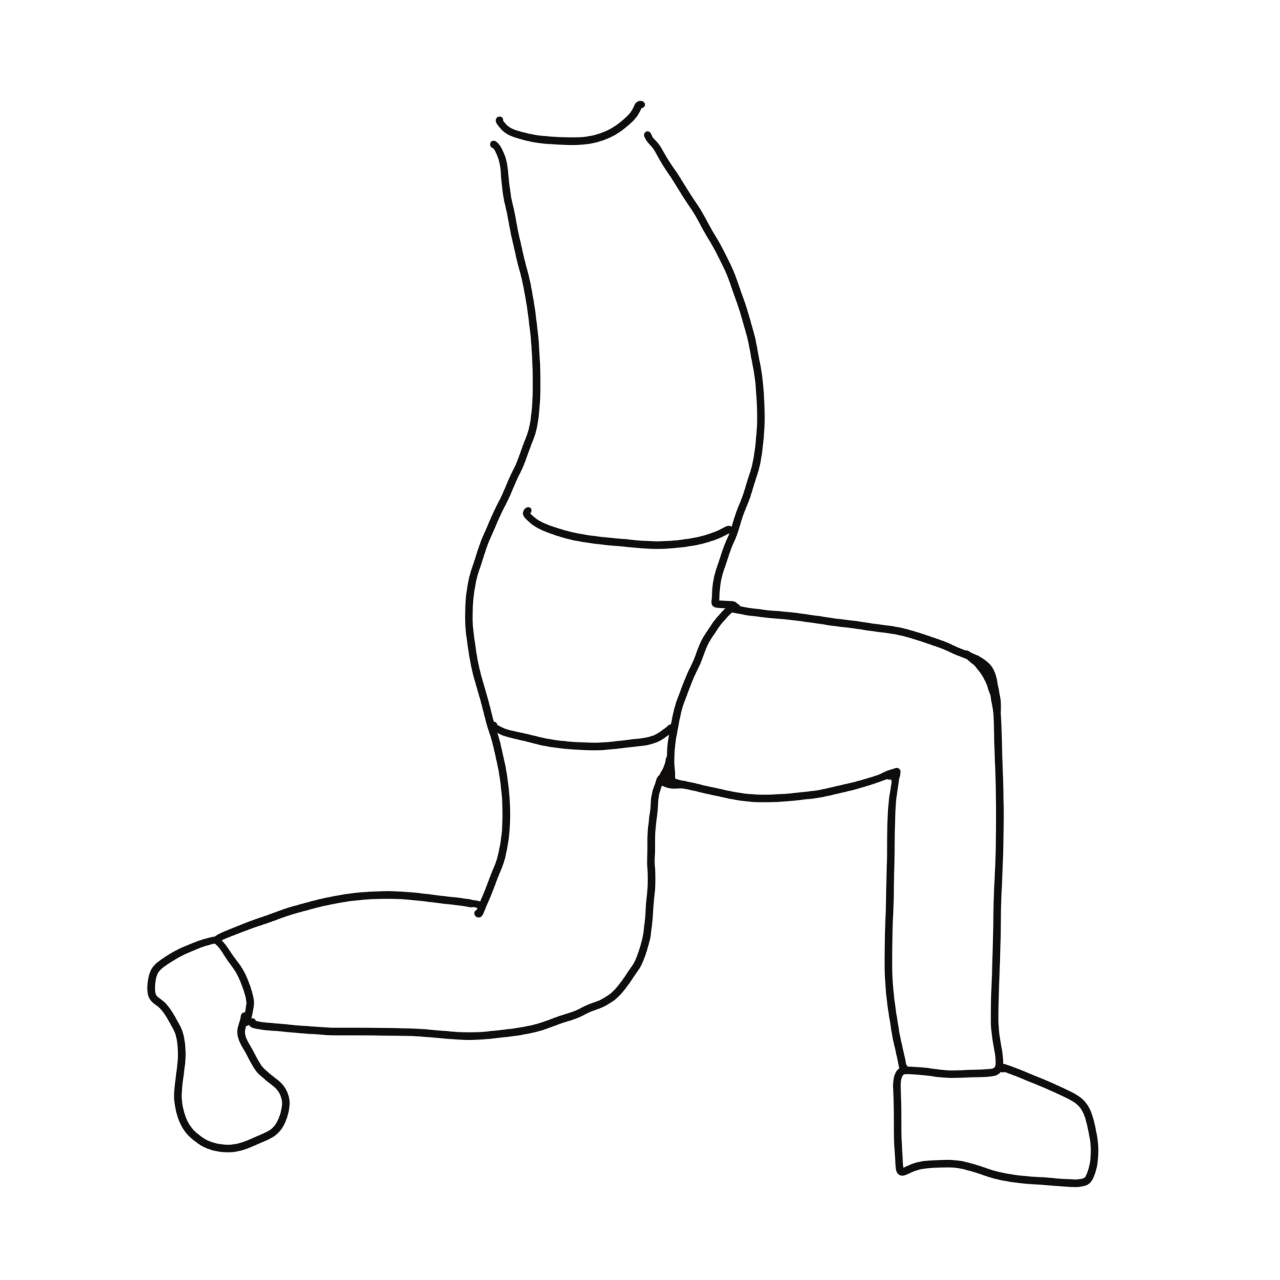 The figure is taking a large step foward with the torso straight down toward the floor with the knee at a 90 degree angle. 